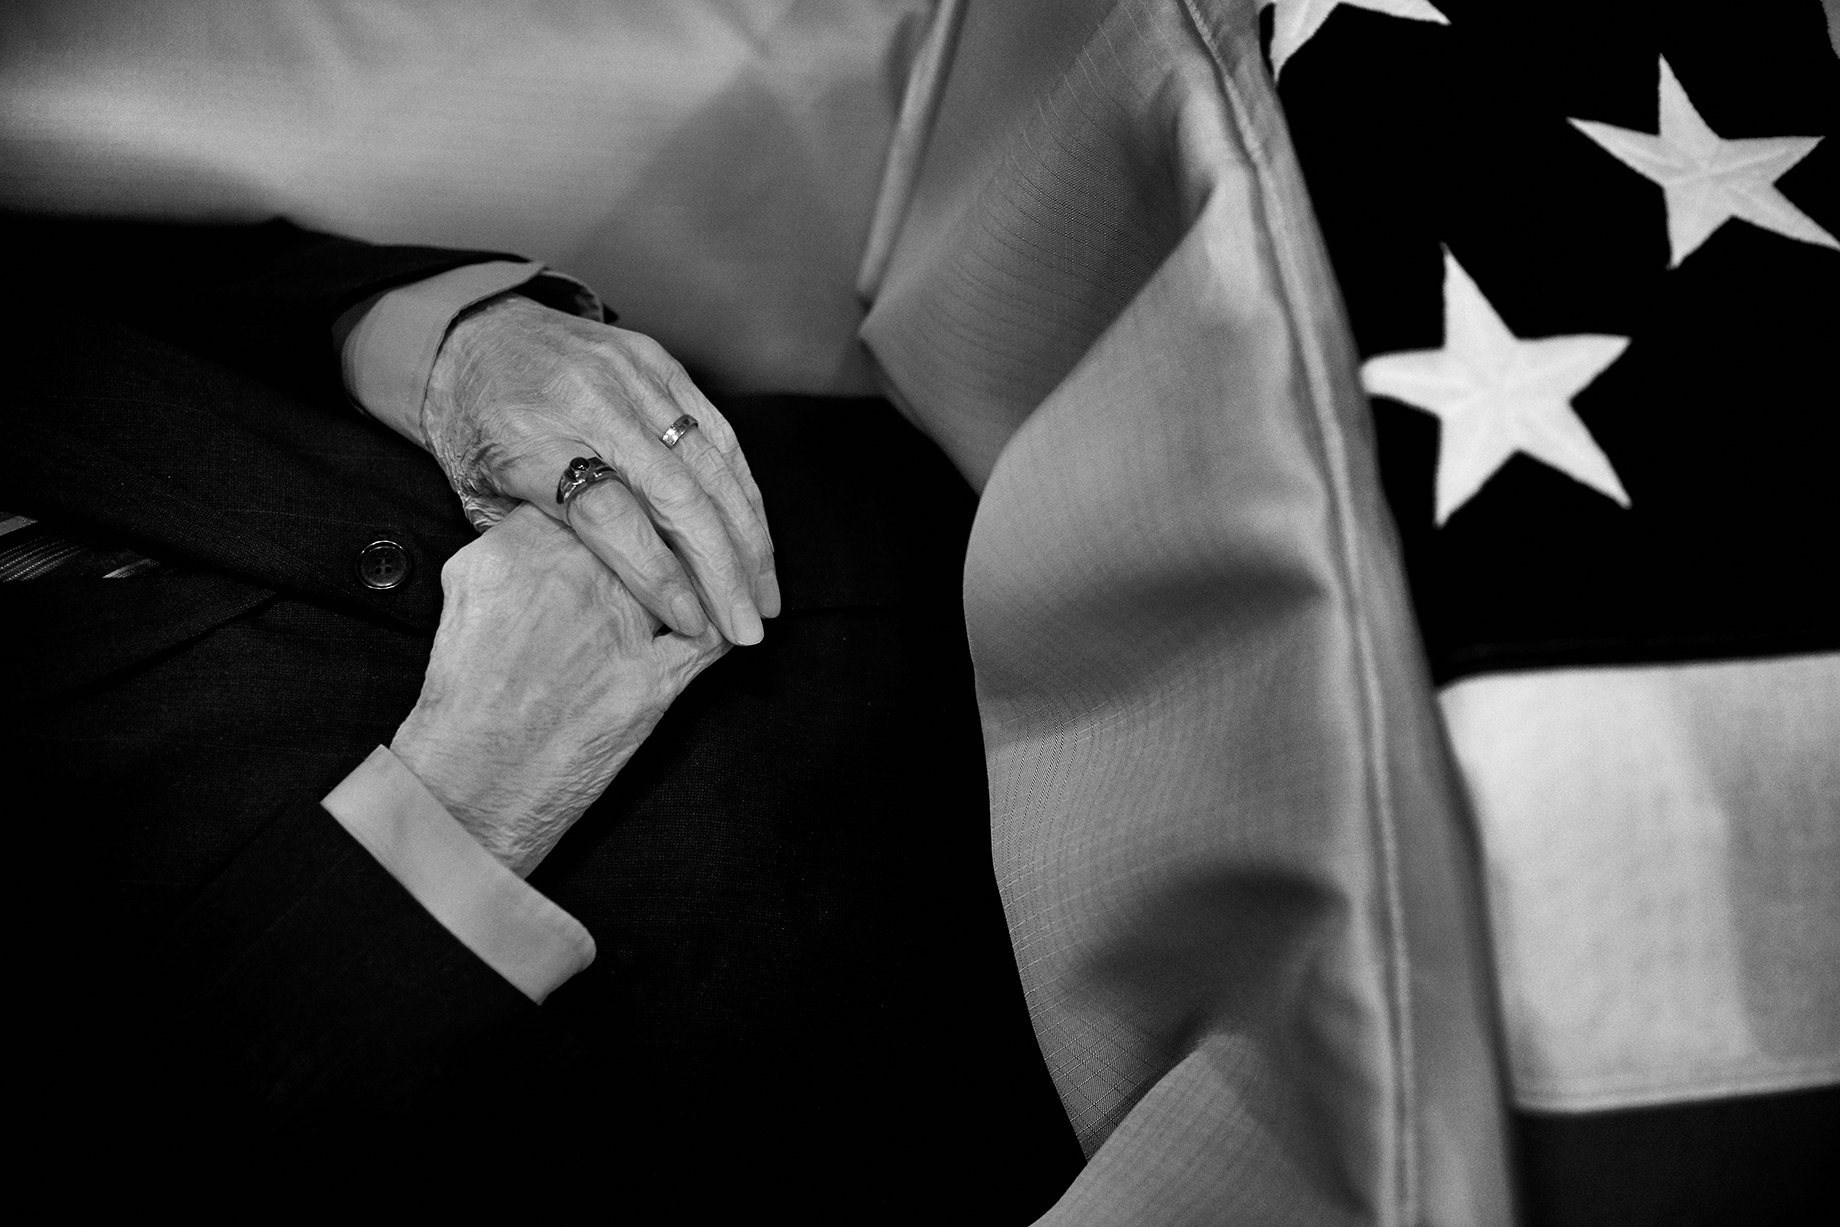 Photographer Sean's grandfather's hands in his casket in black and white